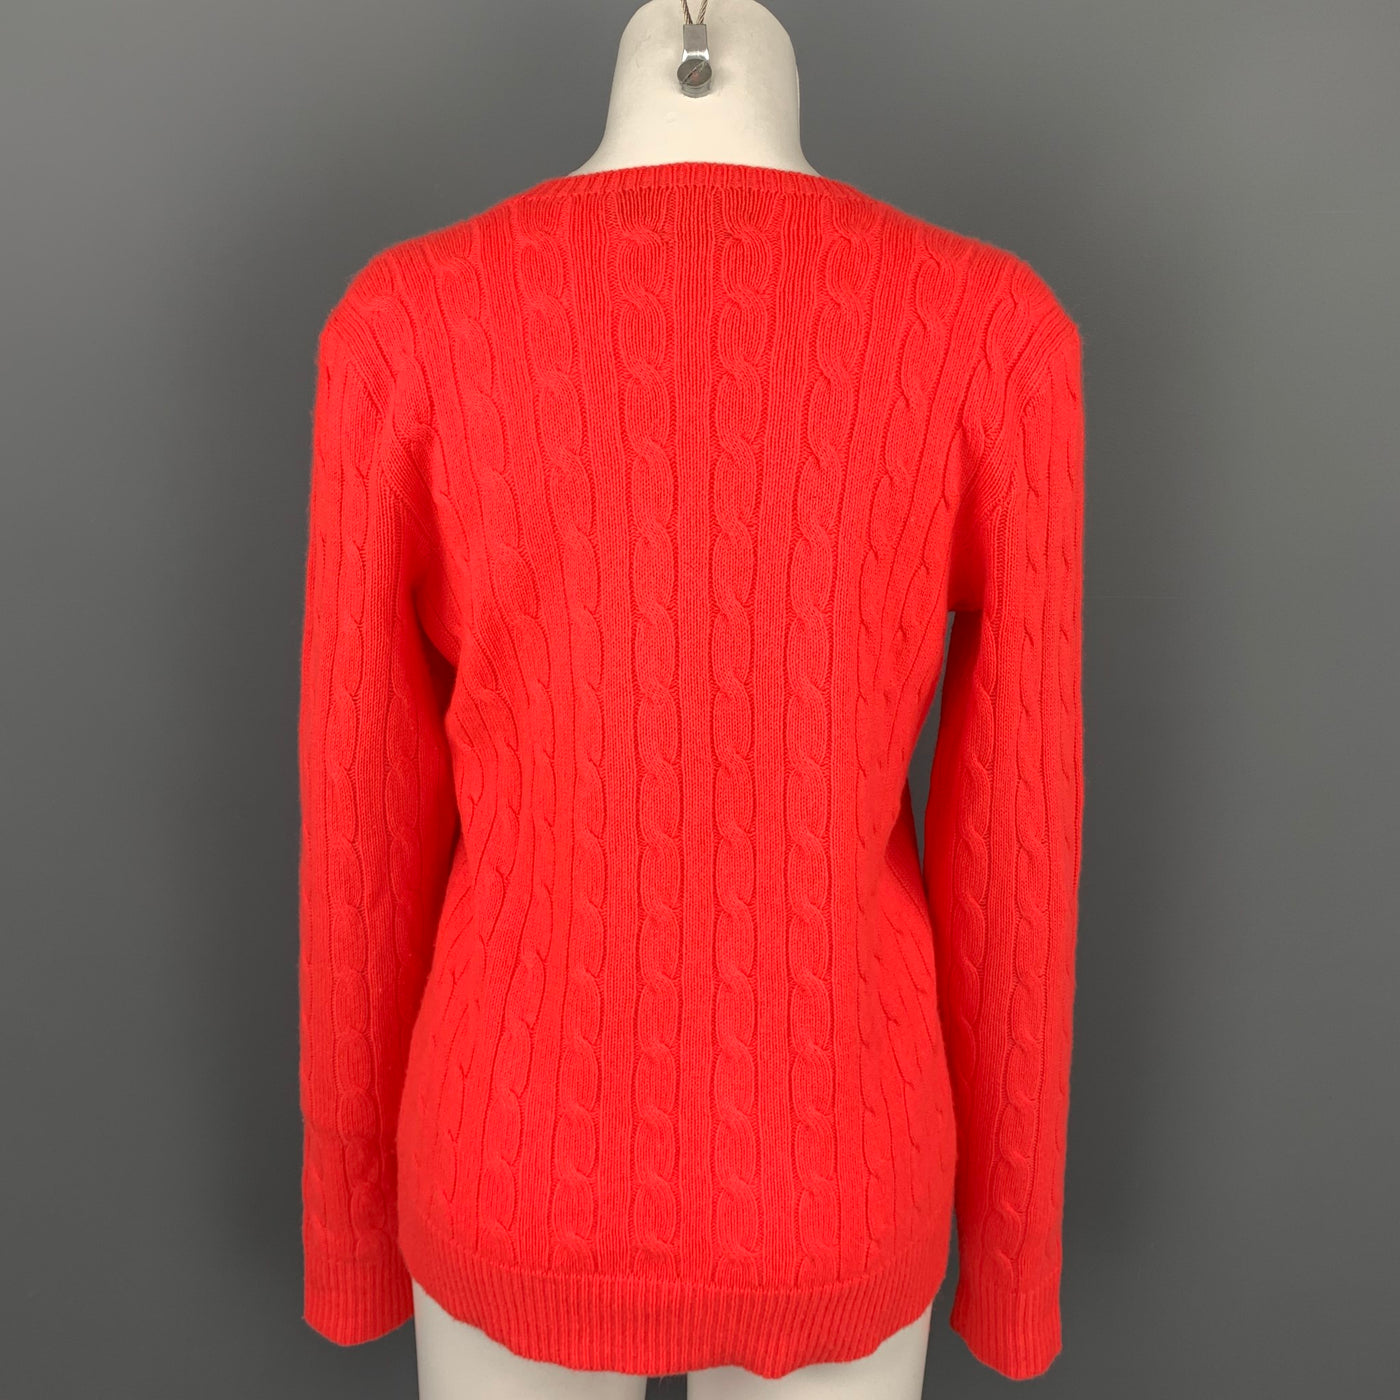 POLO by RALPH LAUREN Size M Orange Cable Knit Cashmere V-Neck Sweater